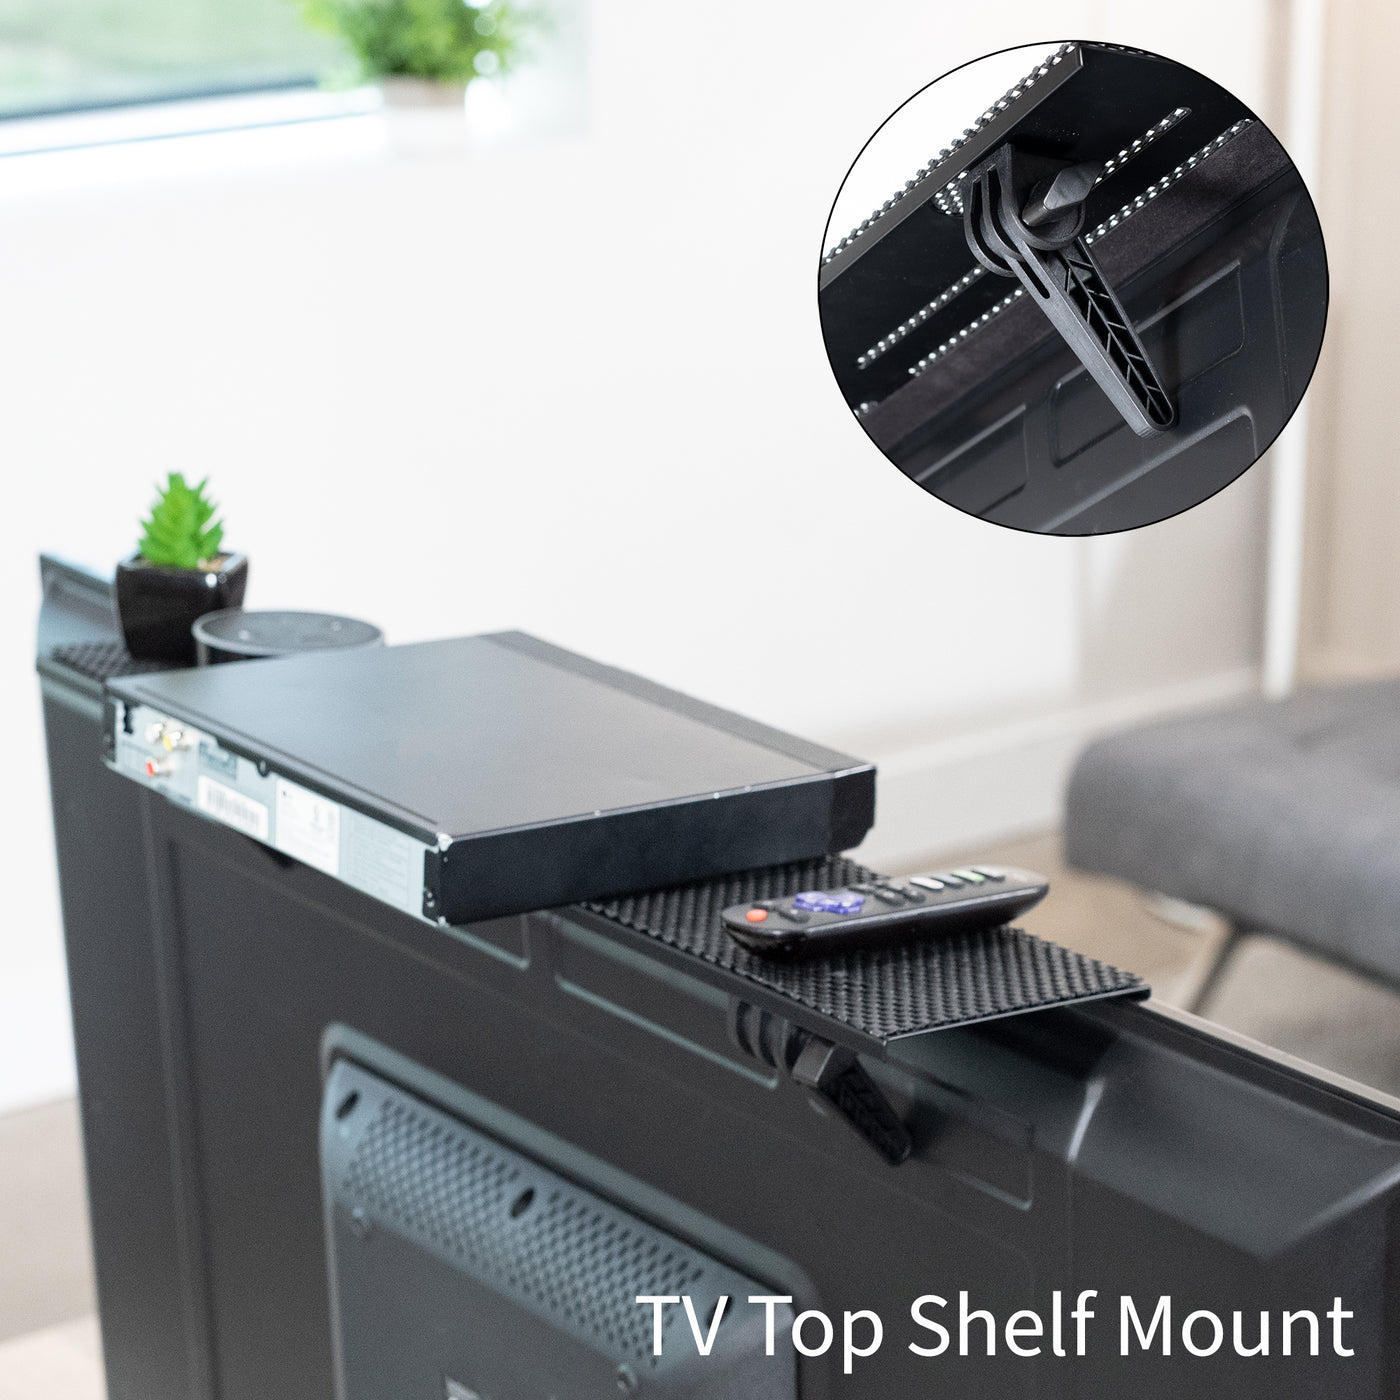 Sturdy top shelf TV mount with vented slots and mesh fabric.